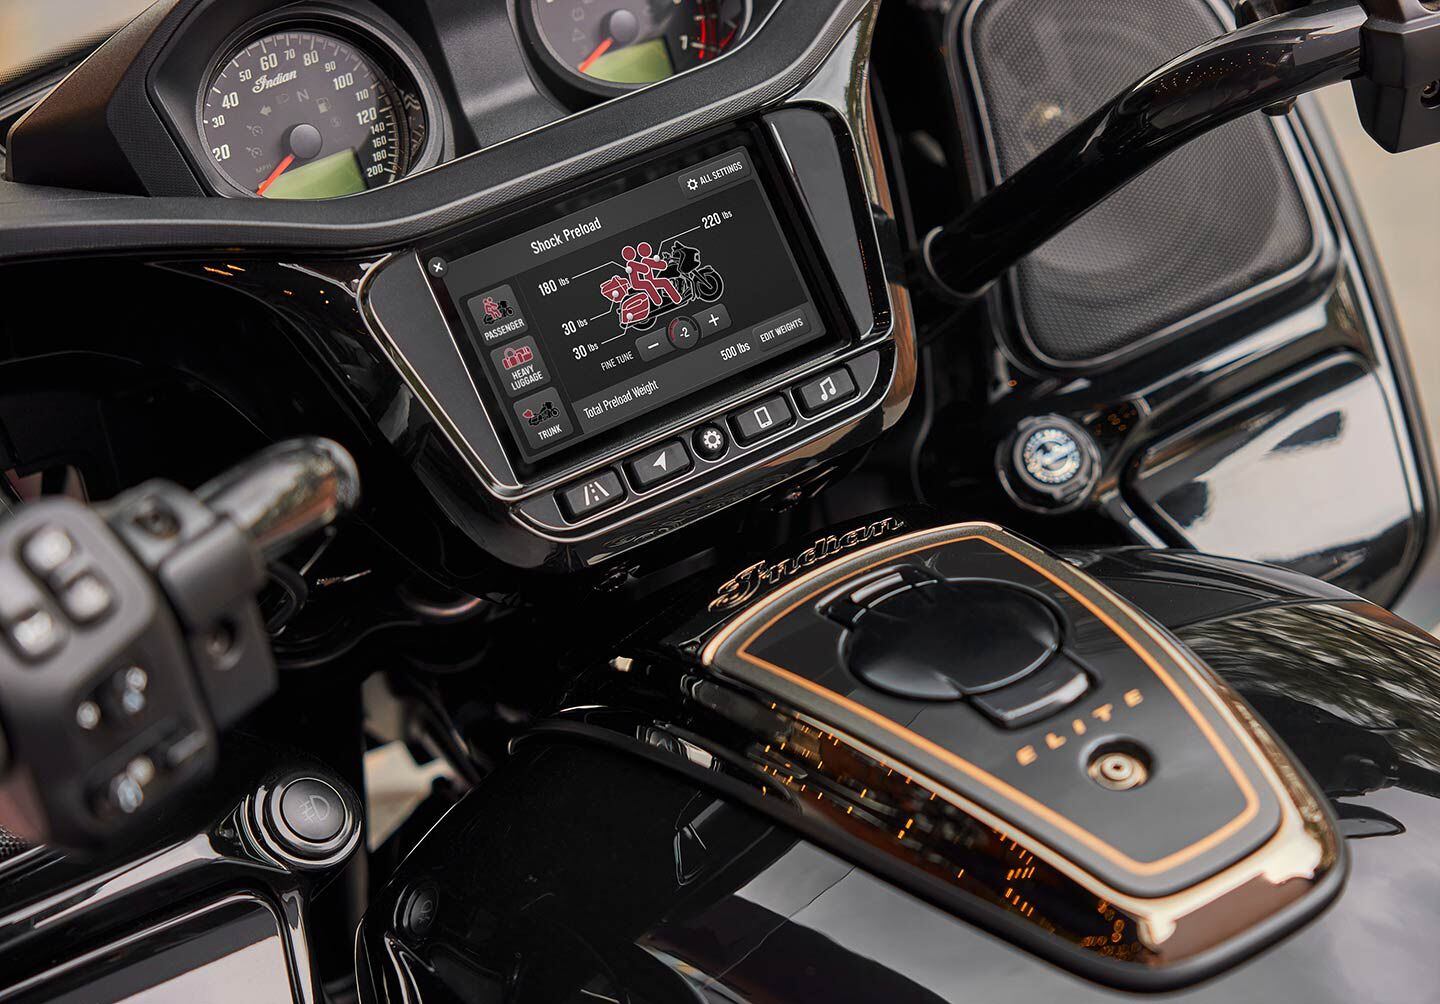 Premium accents on the Pursuit Elite console signify the bike’s limited-edition status. You can input settings for the standard electronically adjustable Fox rear shock from the 7-inch display.